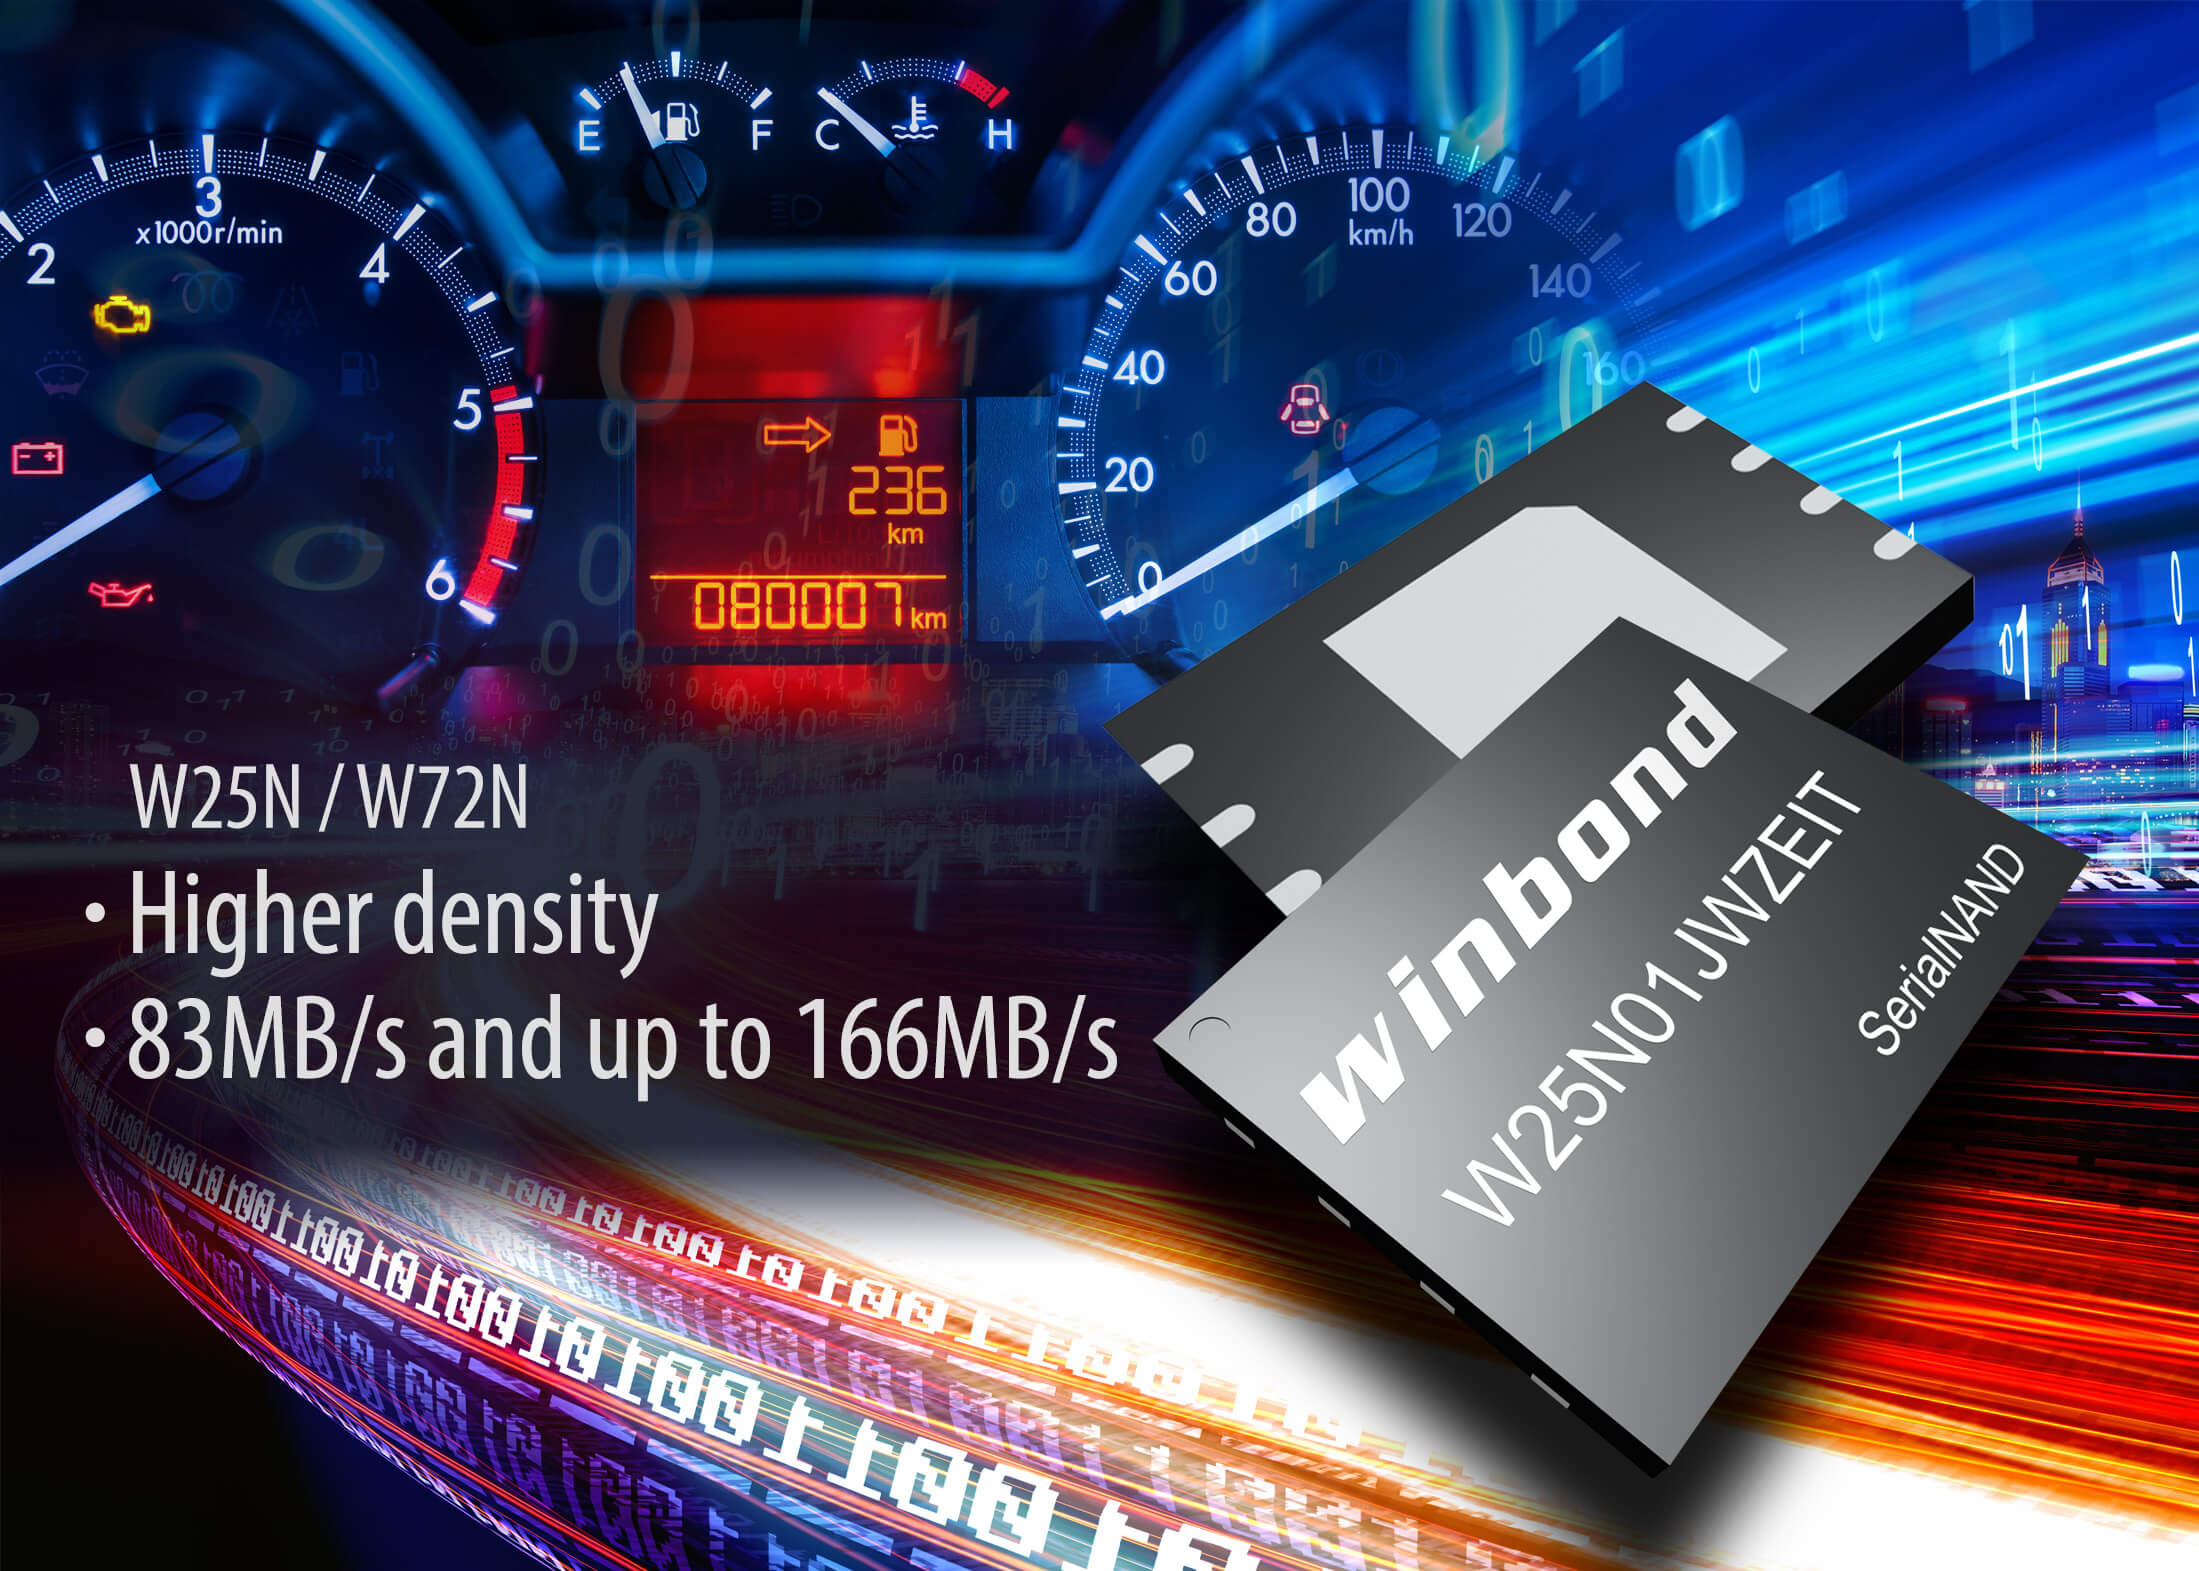 Winbonds W25N / W72N SerialNAND - higher density, 83MB/s and up to 166MB/s